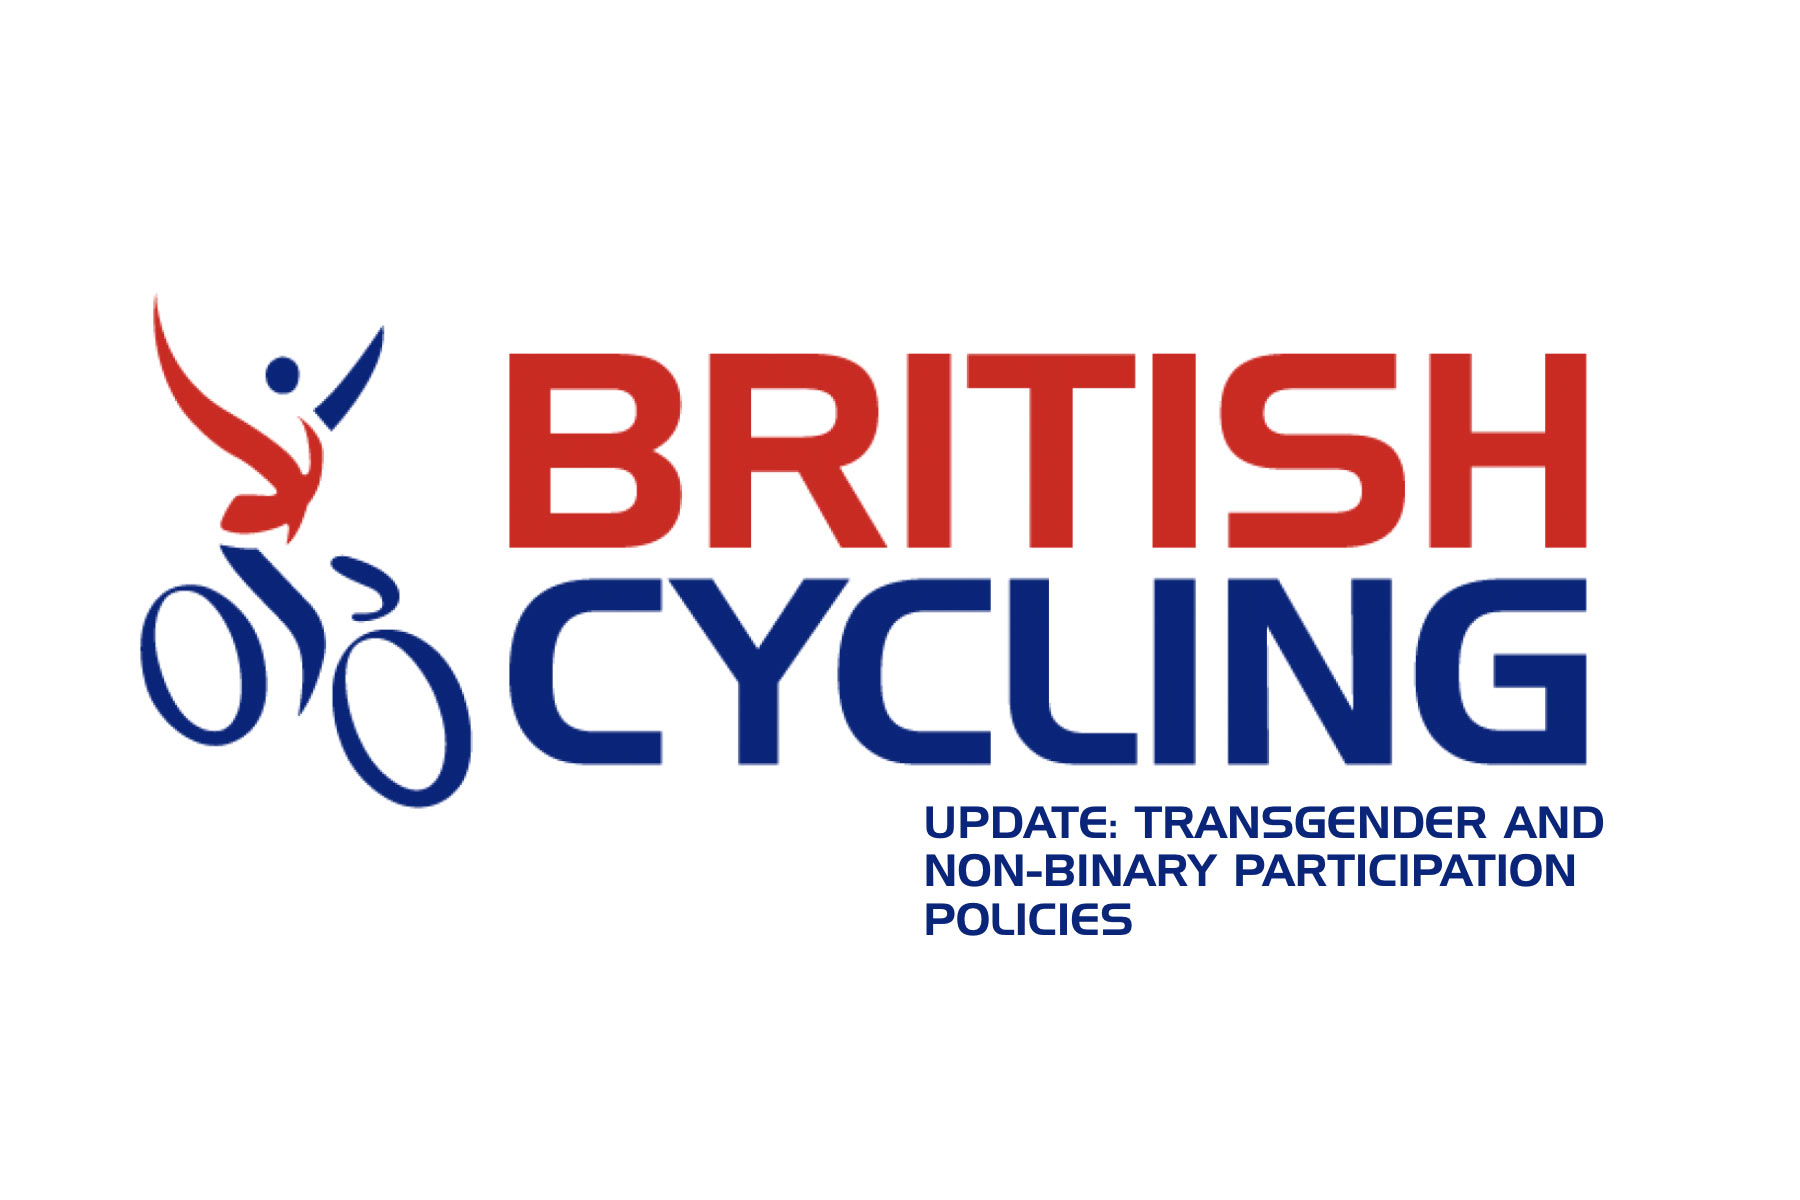 British Cycling Reshapes Transgender & Non-Binary Participation Policies, Creates New Category